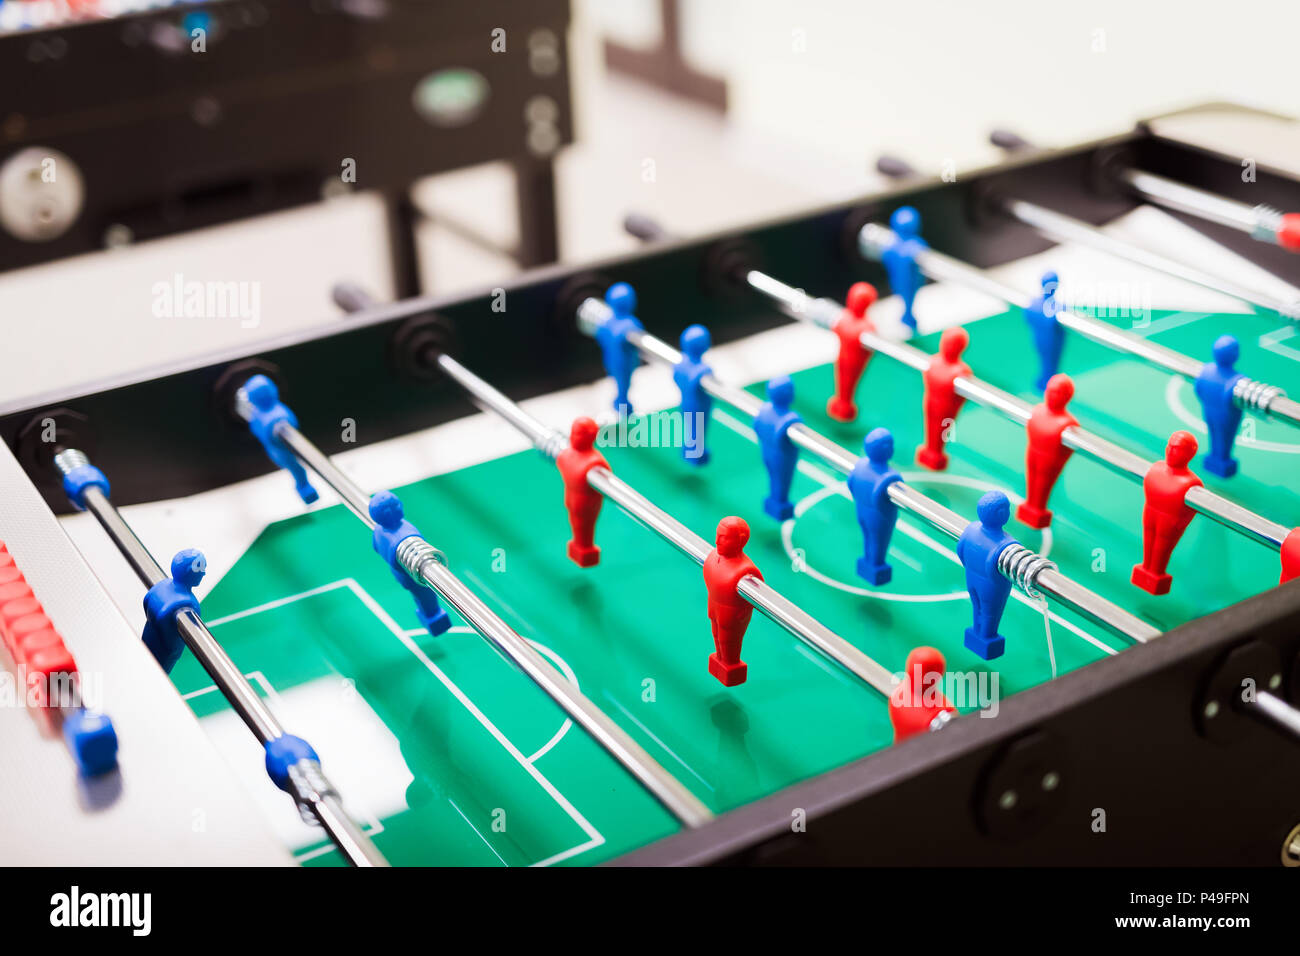 Table football is another group activity Stock Photo